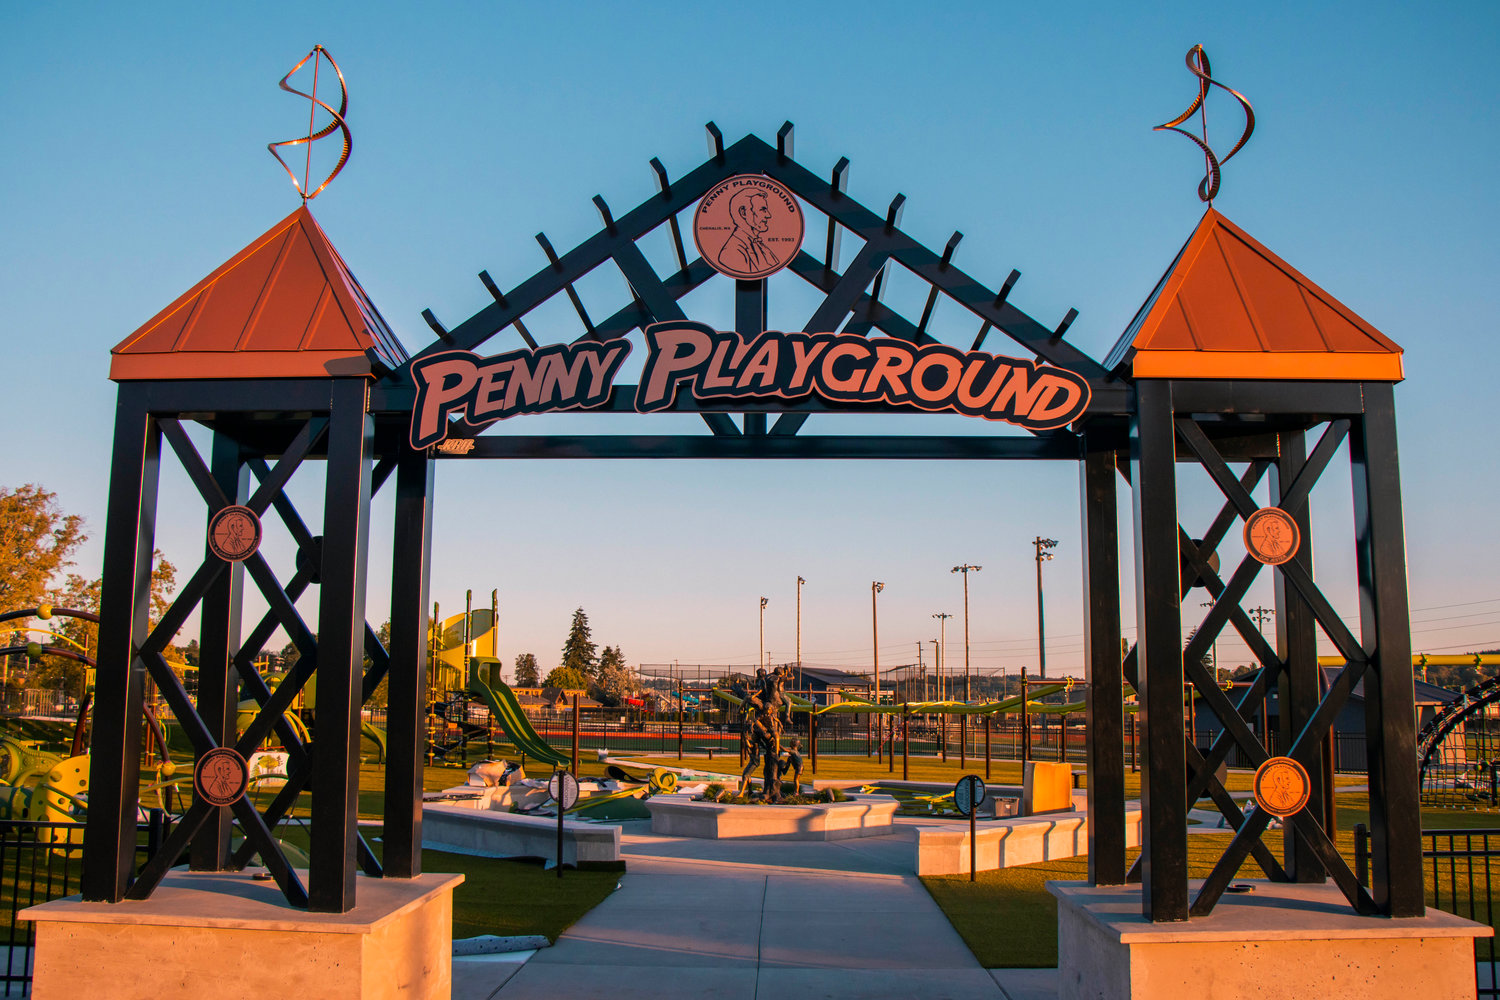 The Penny Playground sign beacons over SW William Ave. Tuesday evening in Chehalis.